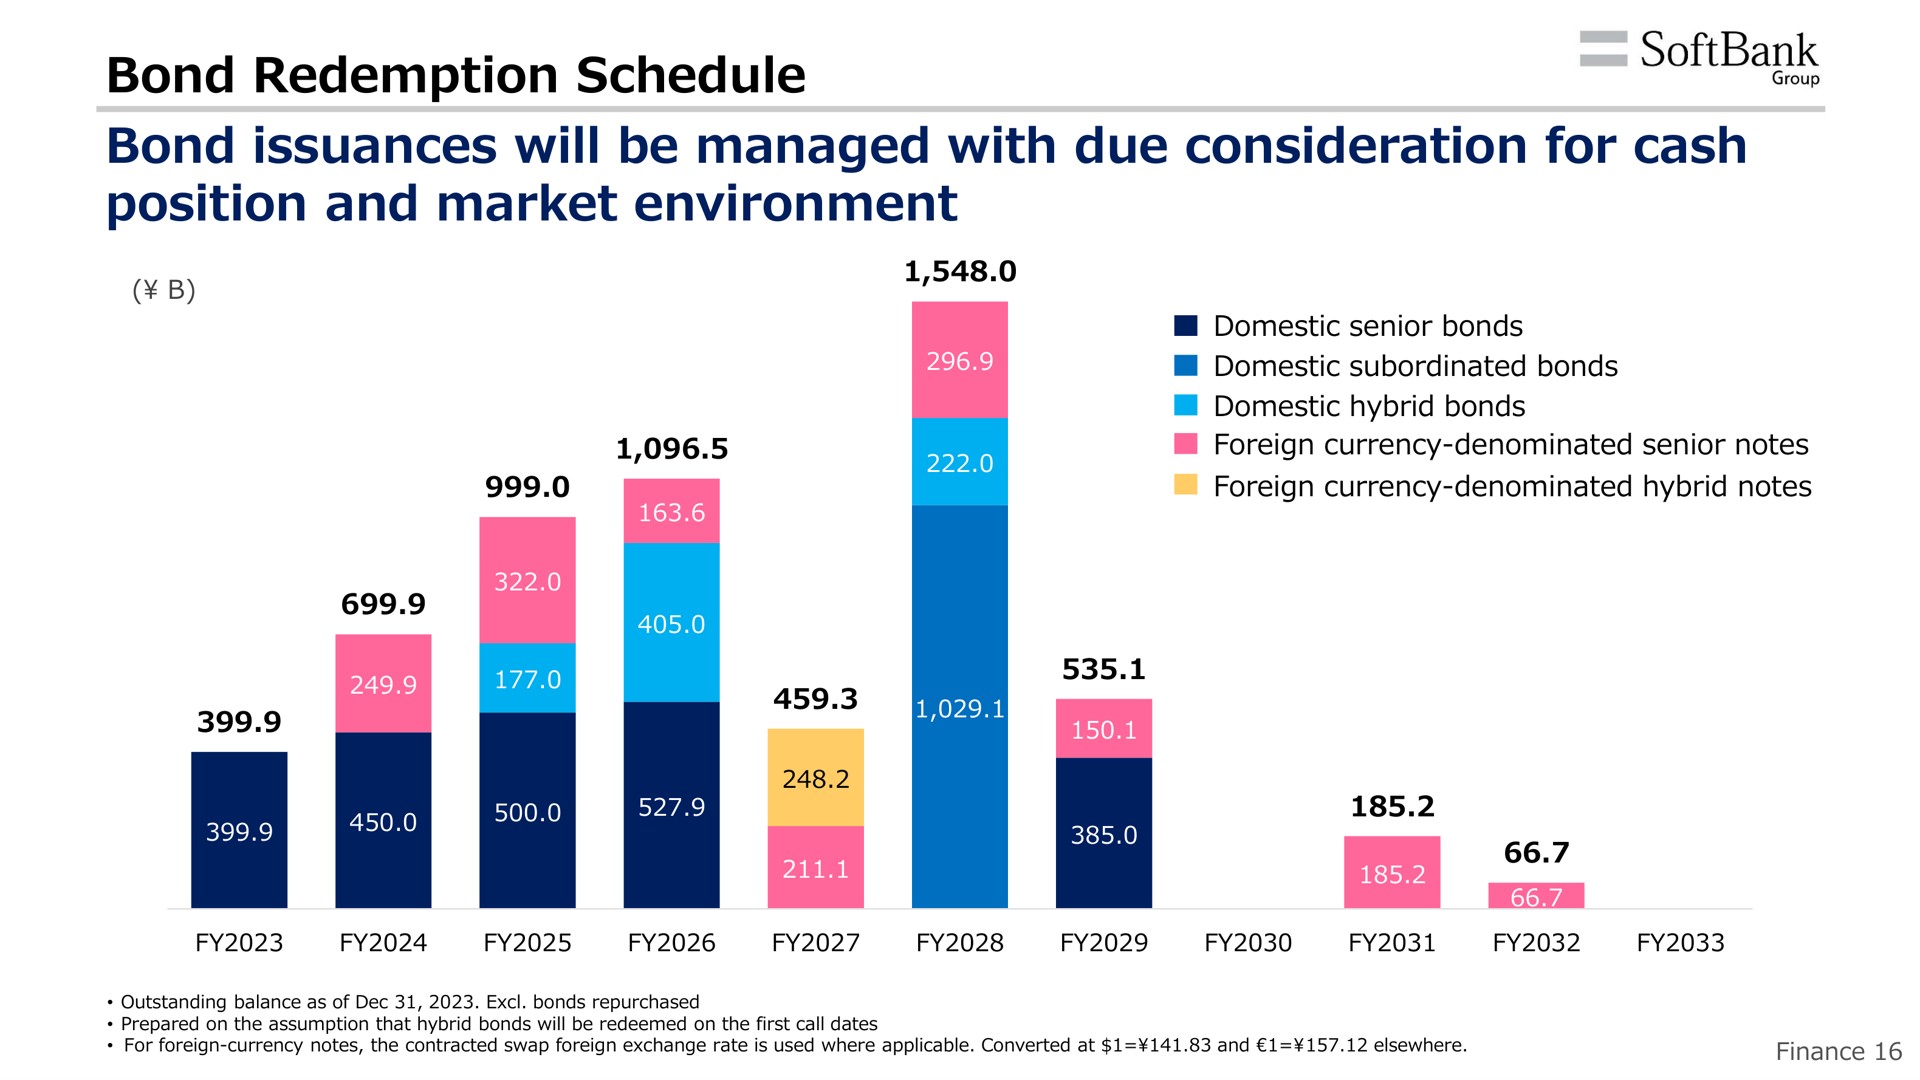 bond redemption schedule bond issuances will be managed with due consideration for cash position and market environment | SoftBank